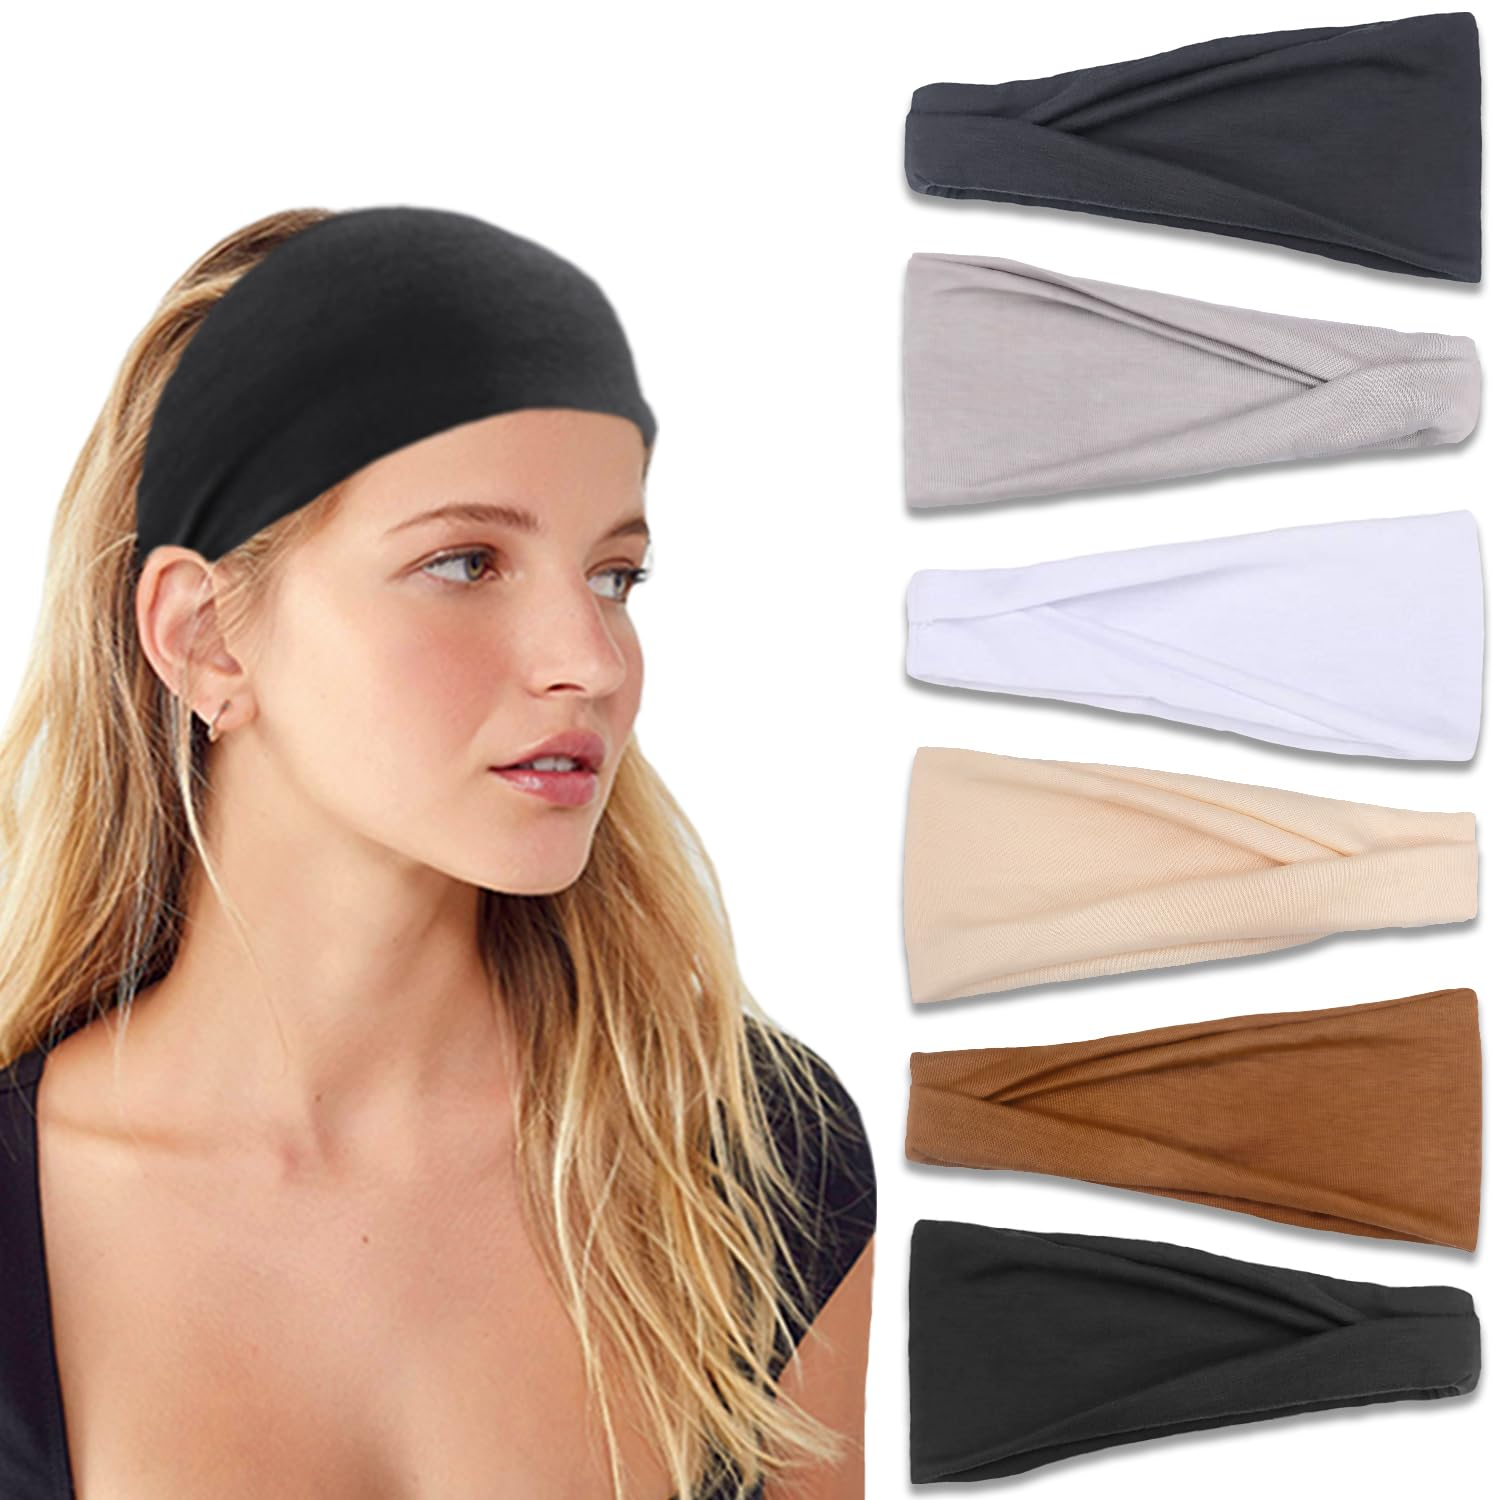 Headbands for Women Premium Stretchy Head Bands Hair Accessories Featured Image